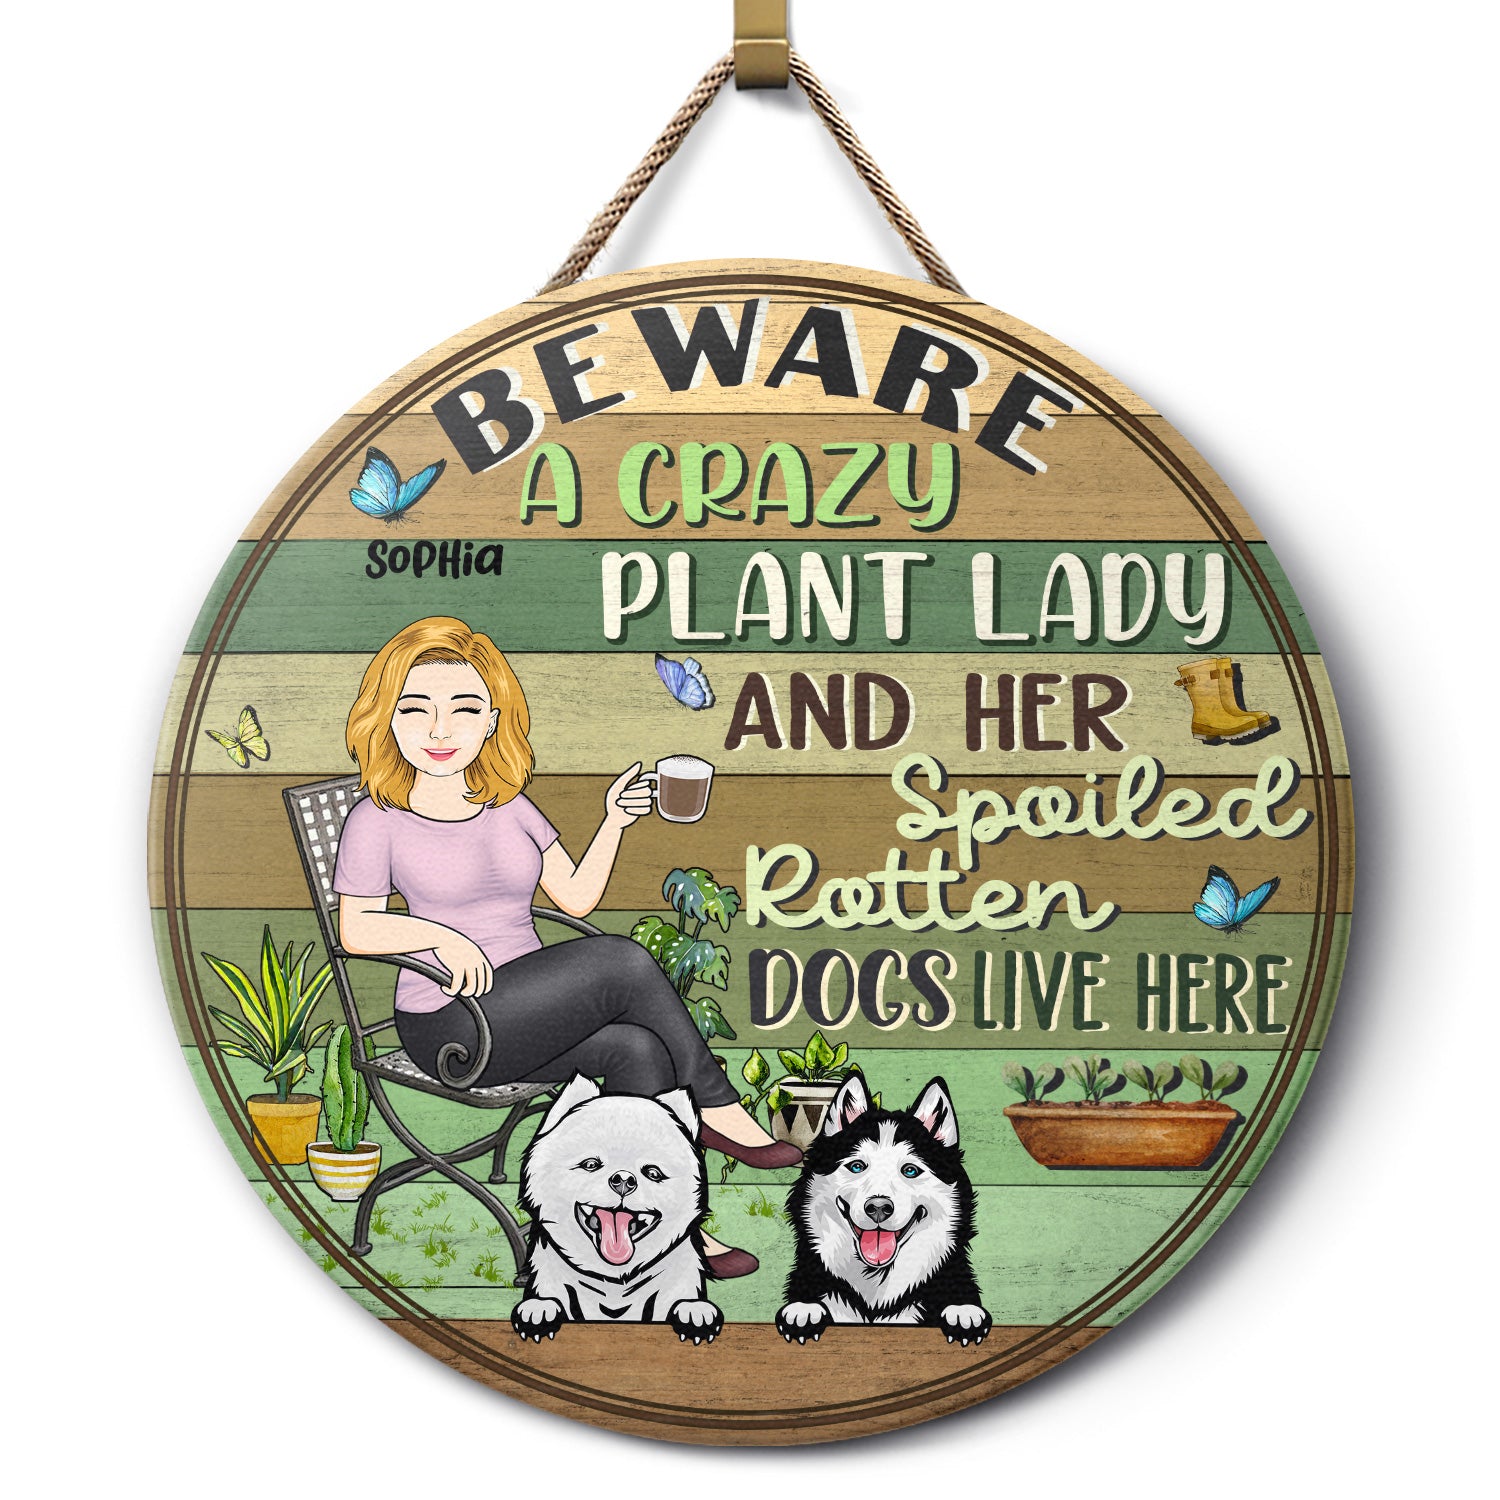 Beware A Crazy Plant Lady & Her Spoiled Rotten Dogs Live Here Gardening - Garden Sign, Birthday, Housewarming Gift For Her, Him, Gardener, Outdoor Decor - Personalized Custom Wood Circle Sign